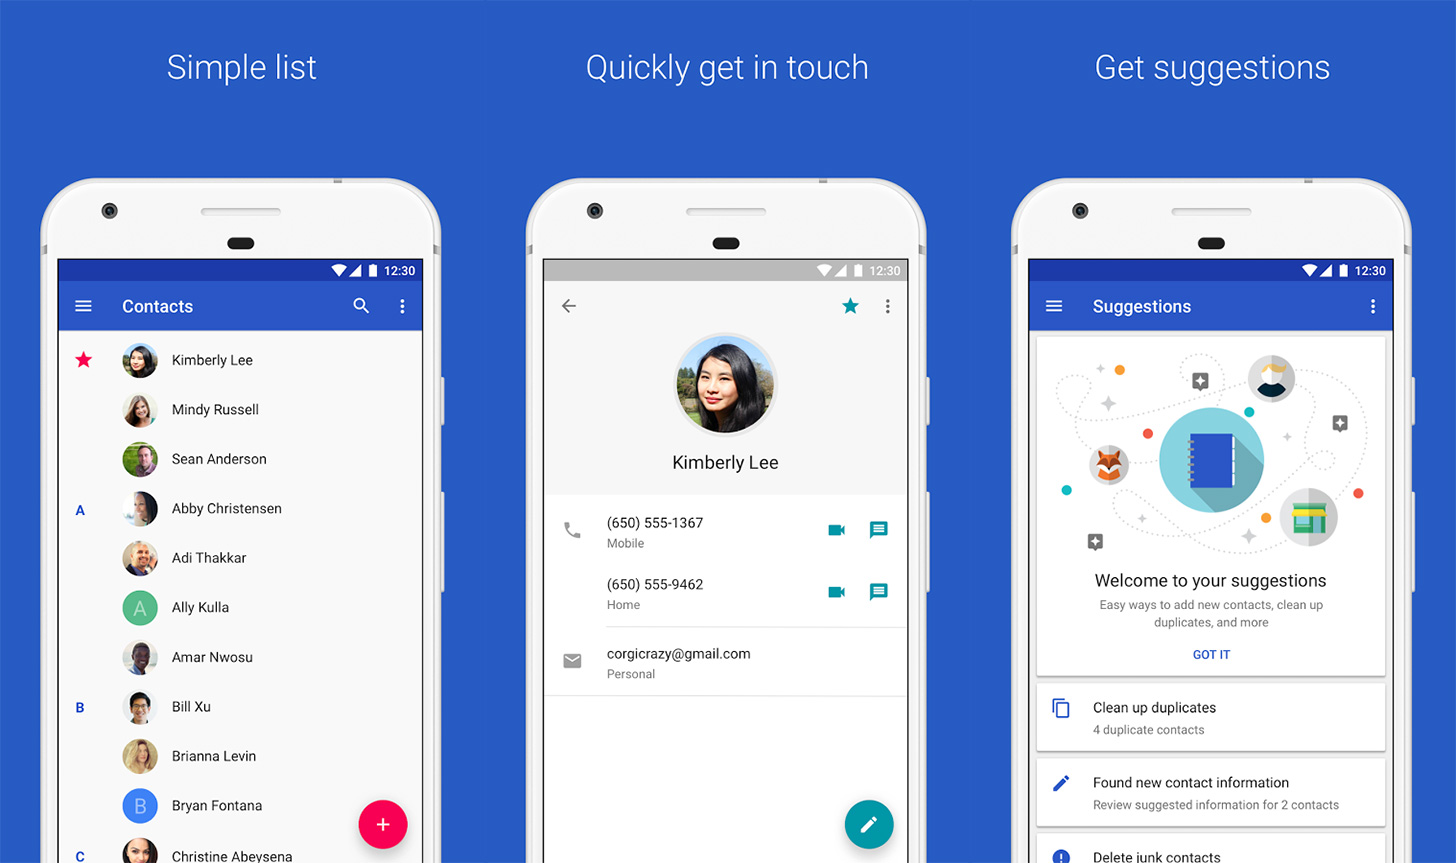 Google Contacts app now available to devices on Android 5.0 and up.